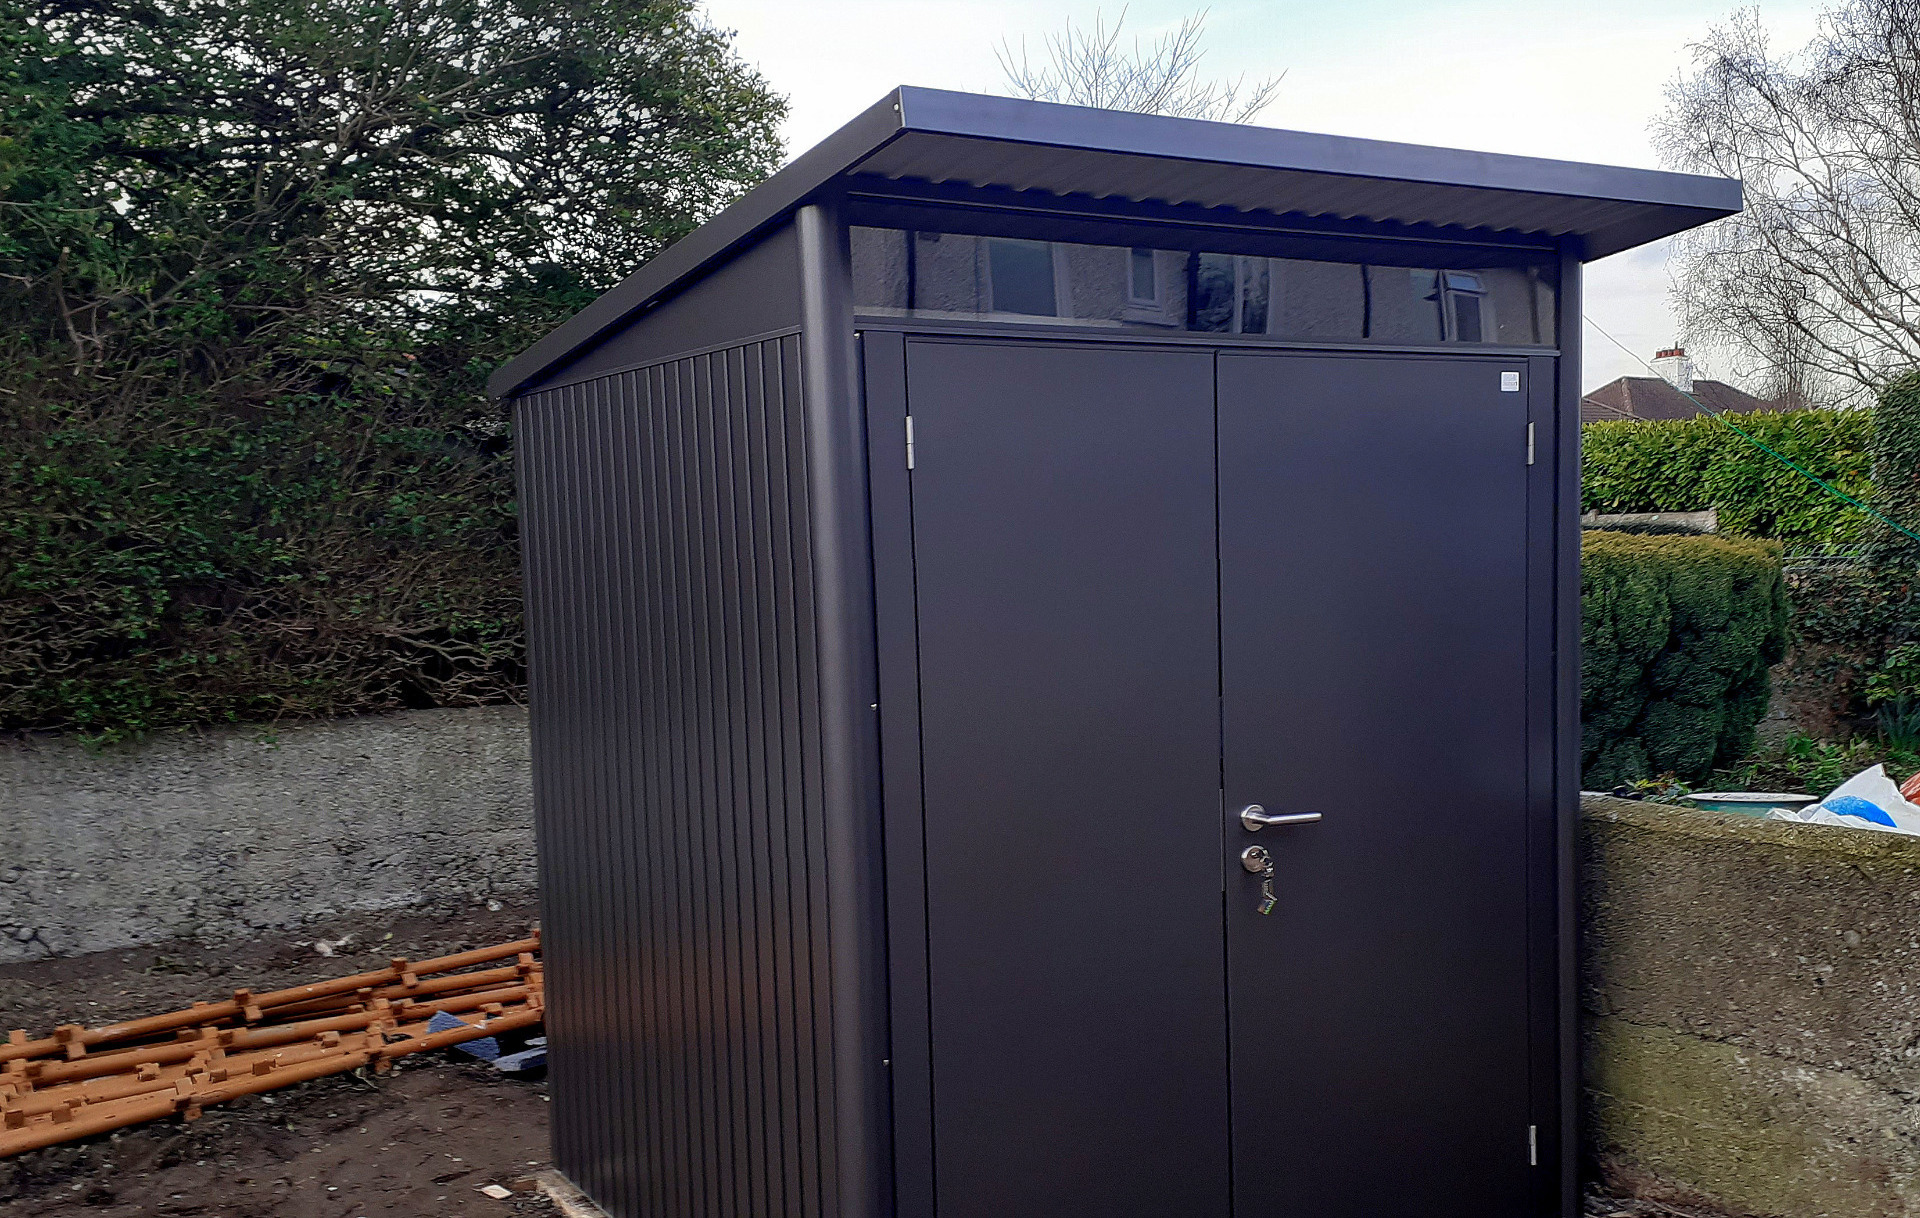 Biohort AvantGarde A1 with optional double doors | Stylish, rugged and no maintenance | Supplied + fitted in Dublin 6W | Pay less for Biohort at Owen Chubb GardenStudio, Tel 087-2306 128